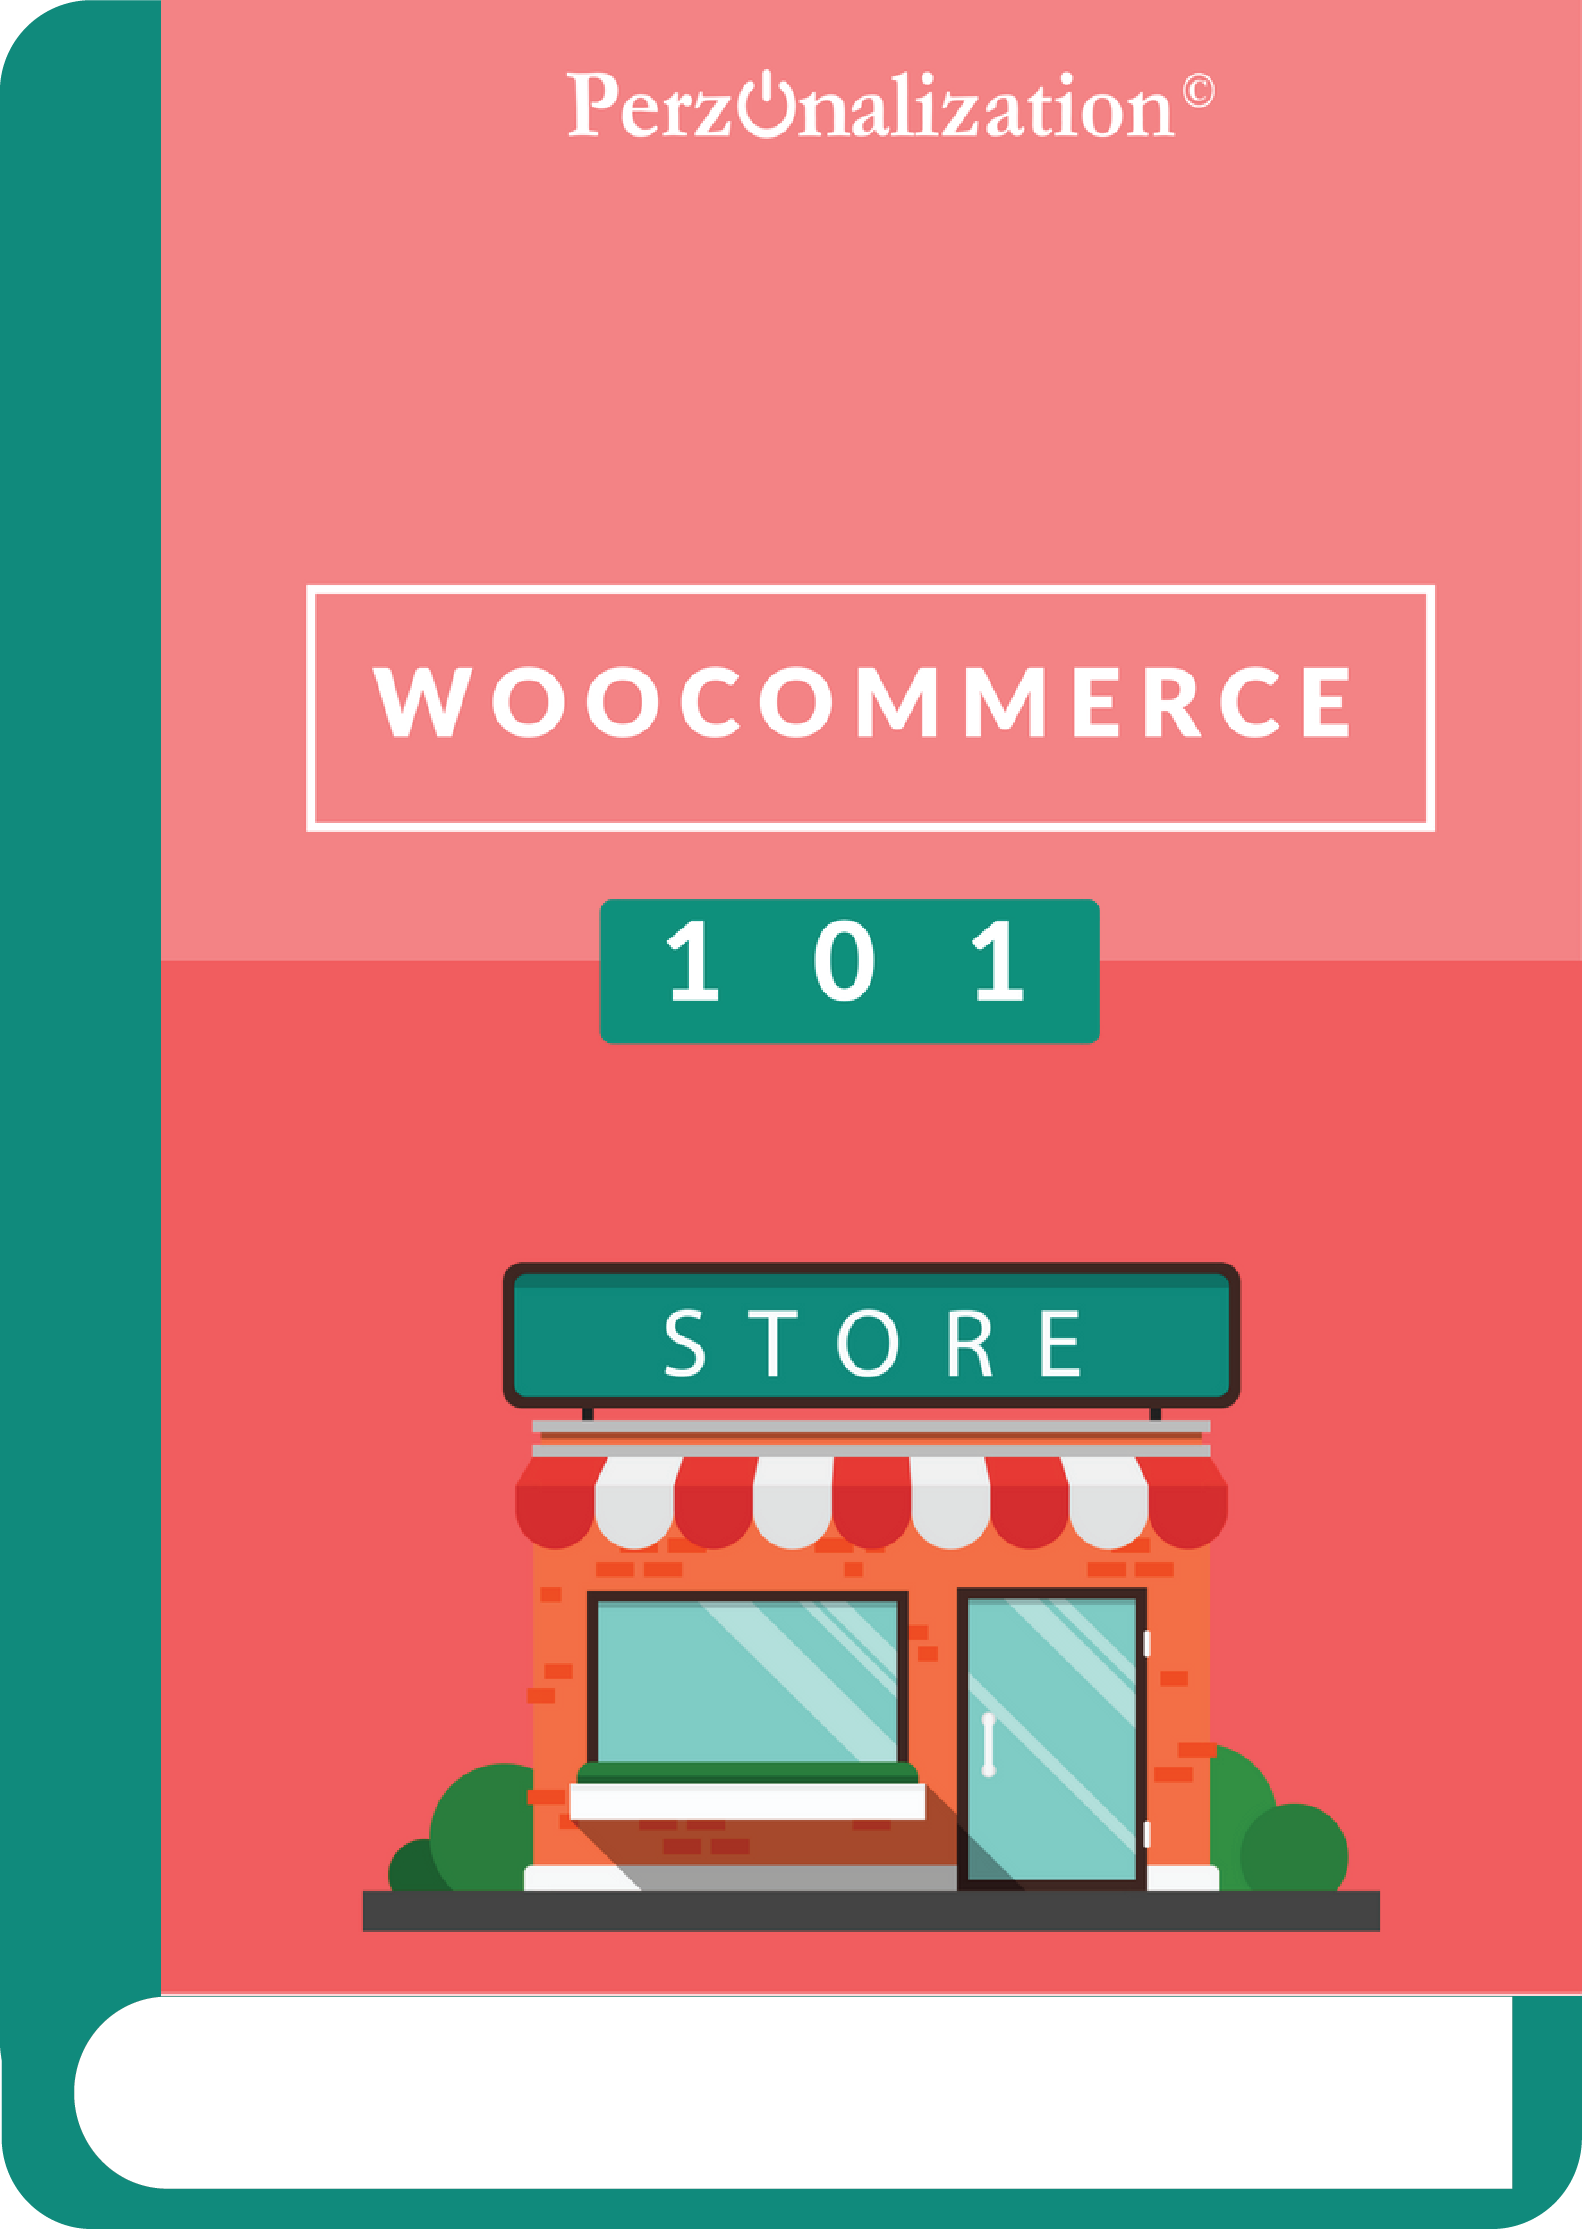 If you already have a blog hosted on WordPress and would like to start an eCommerce business, the most logical route is to install the WooCommerce extension to add eCommerce website functionality on top of your blog. Find out in this eBook how a WordPress blogger can benefit from WooCommerce extension.